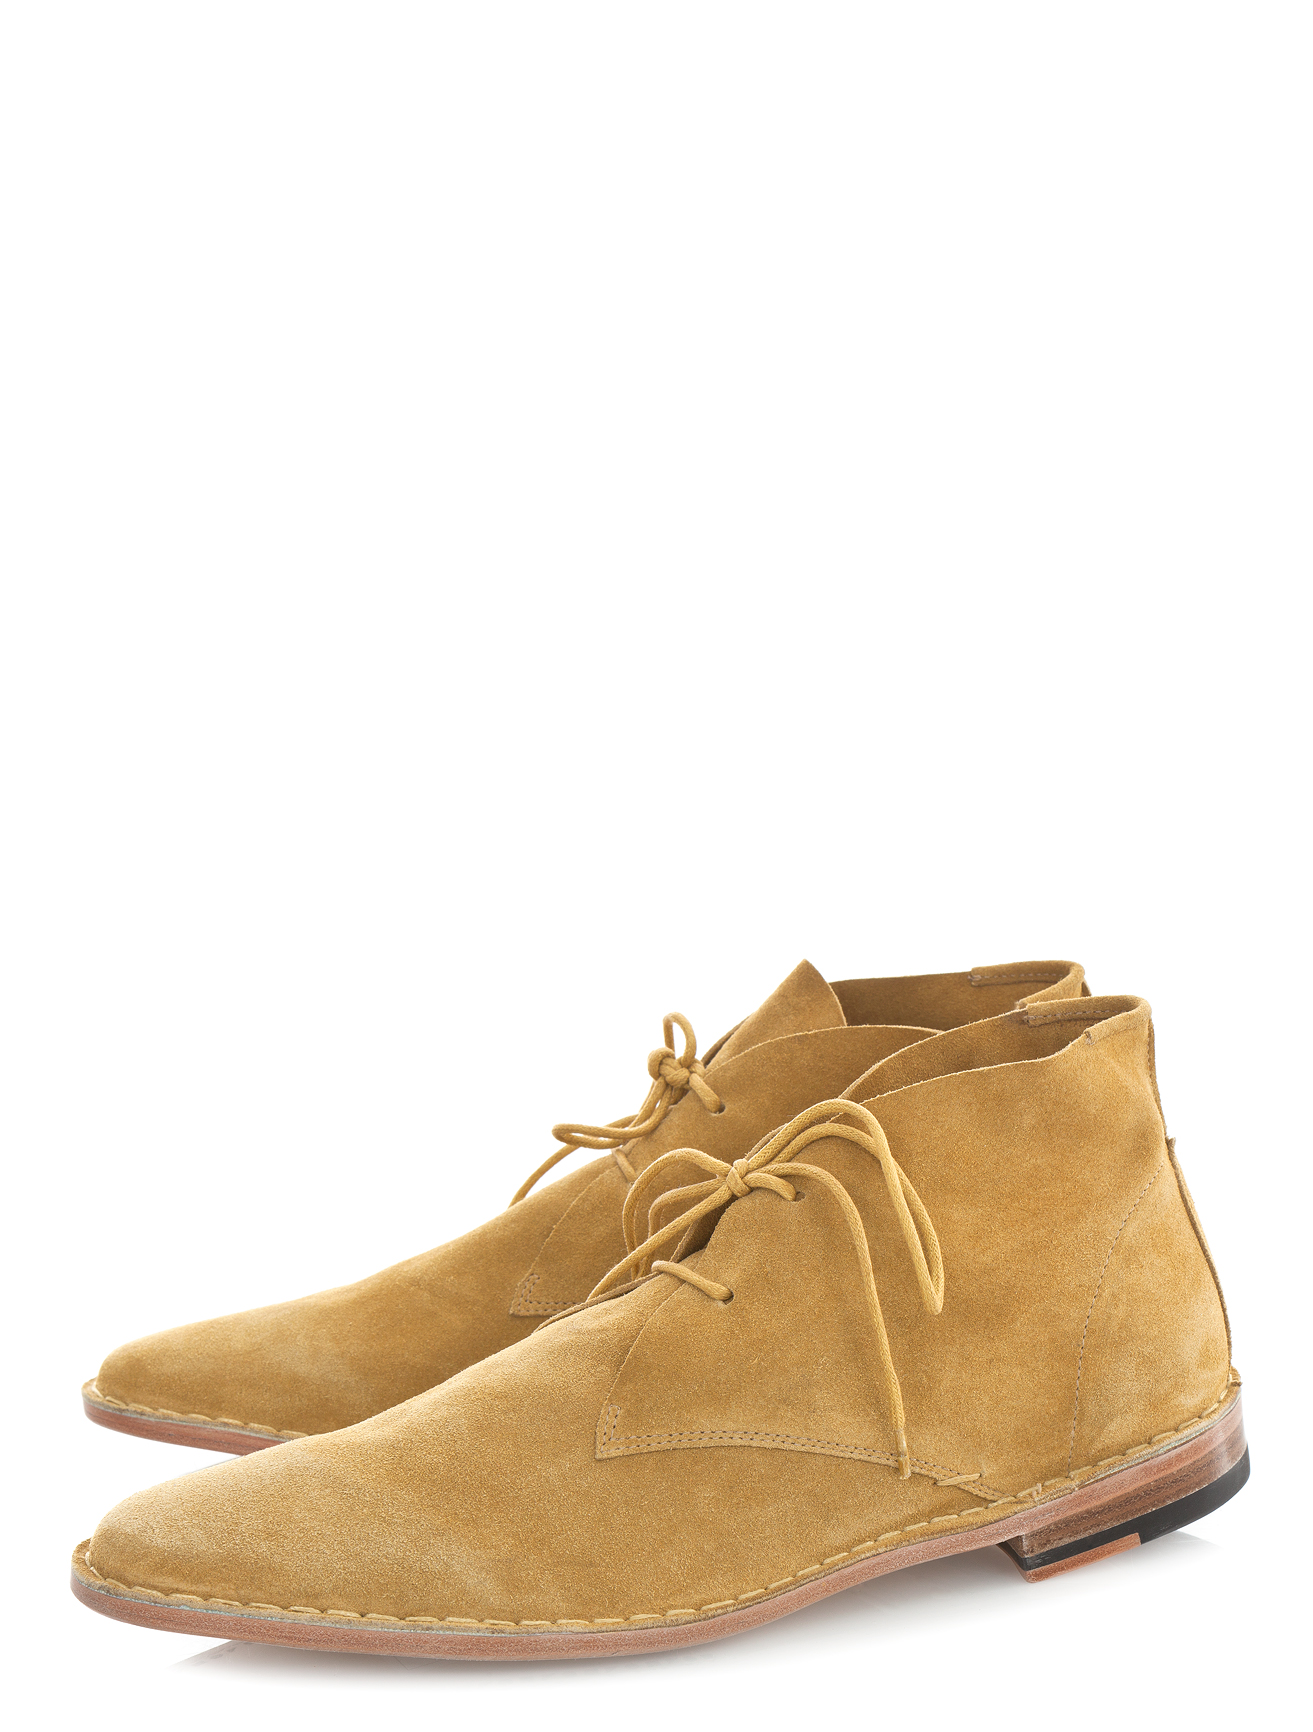 Shipley & Halmos Max Suede Leather Desert Boots in Yellow for Men ...